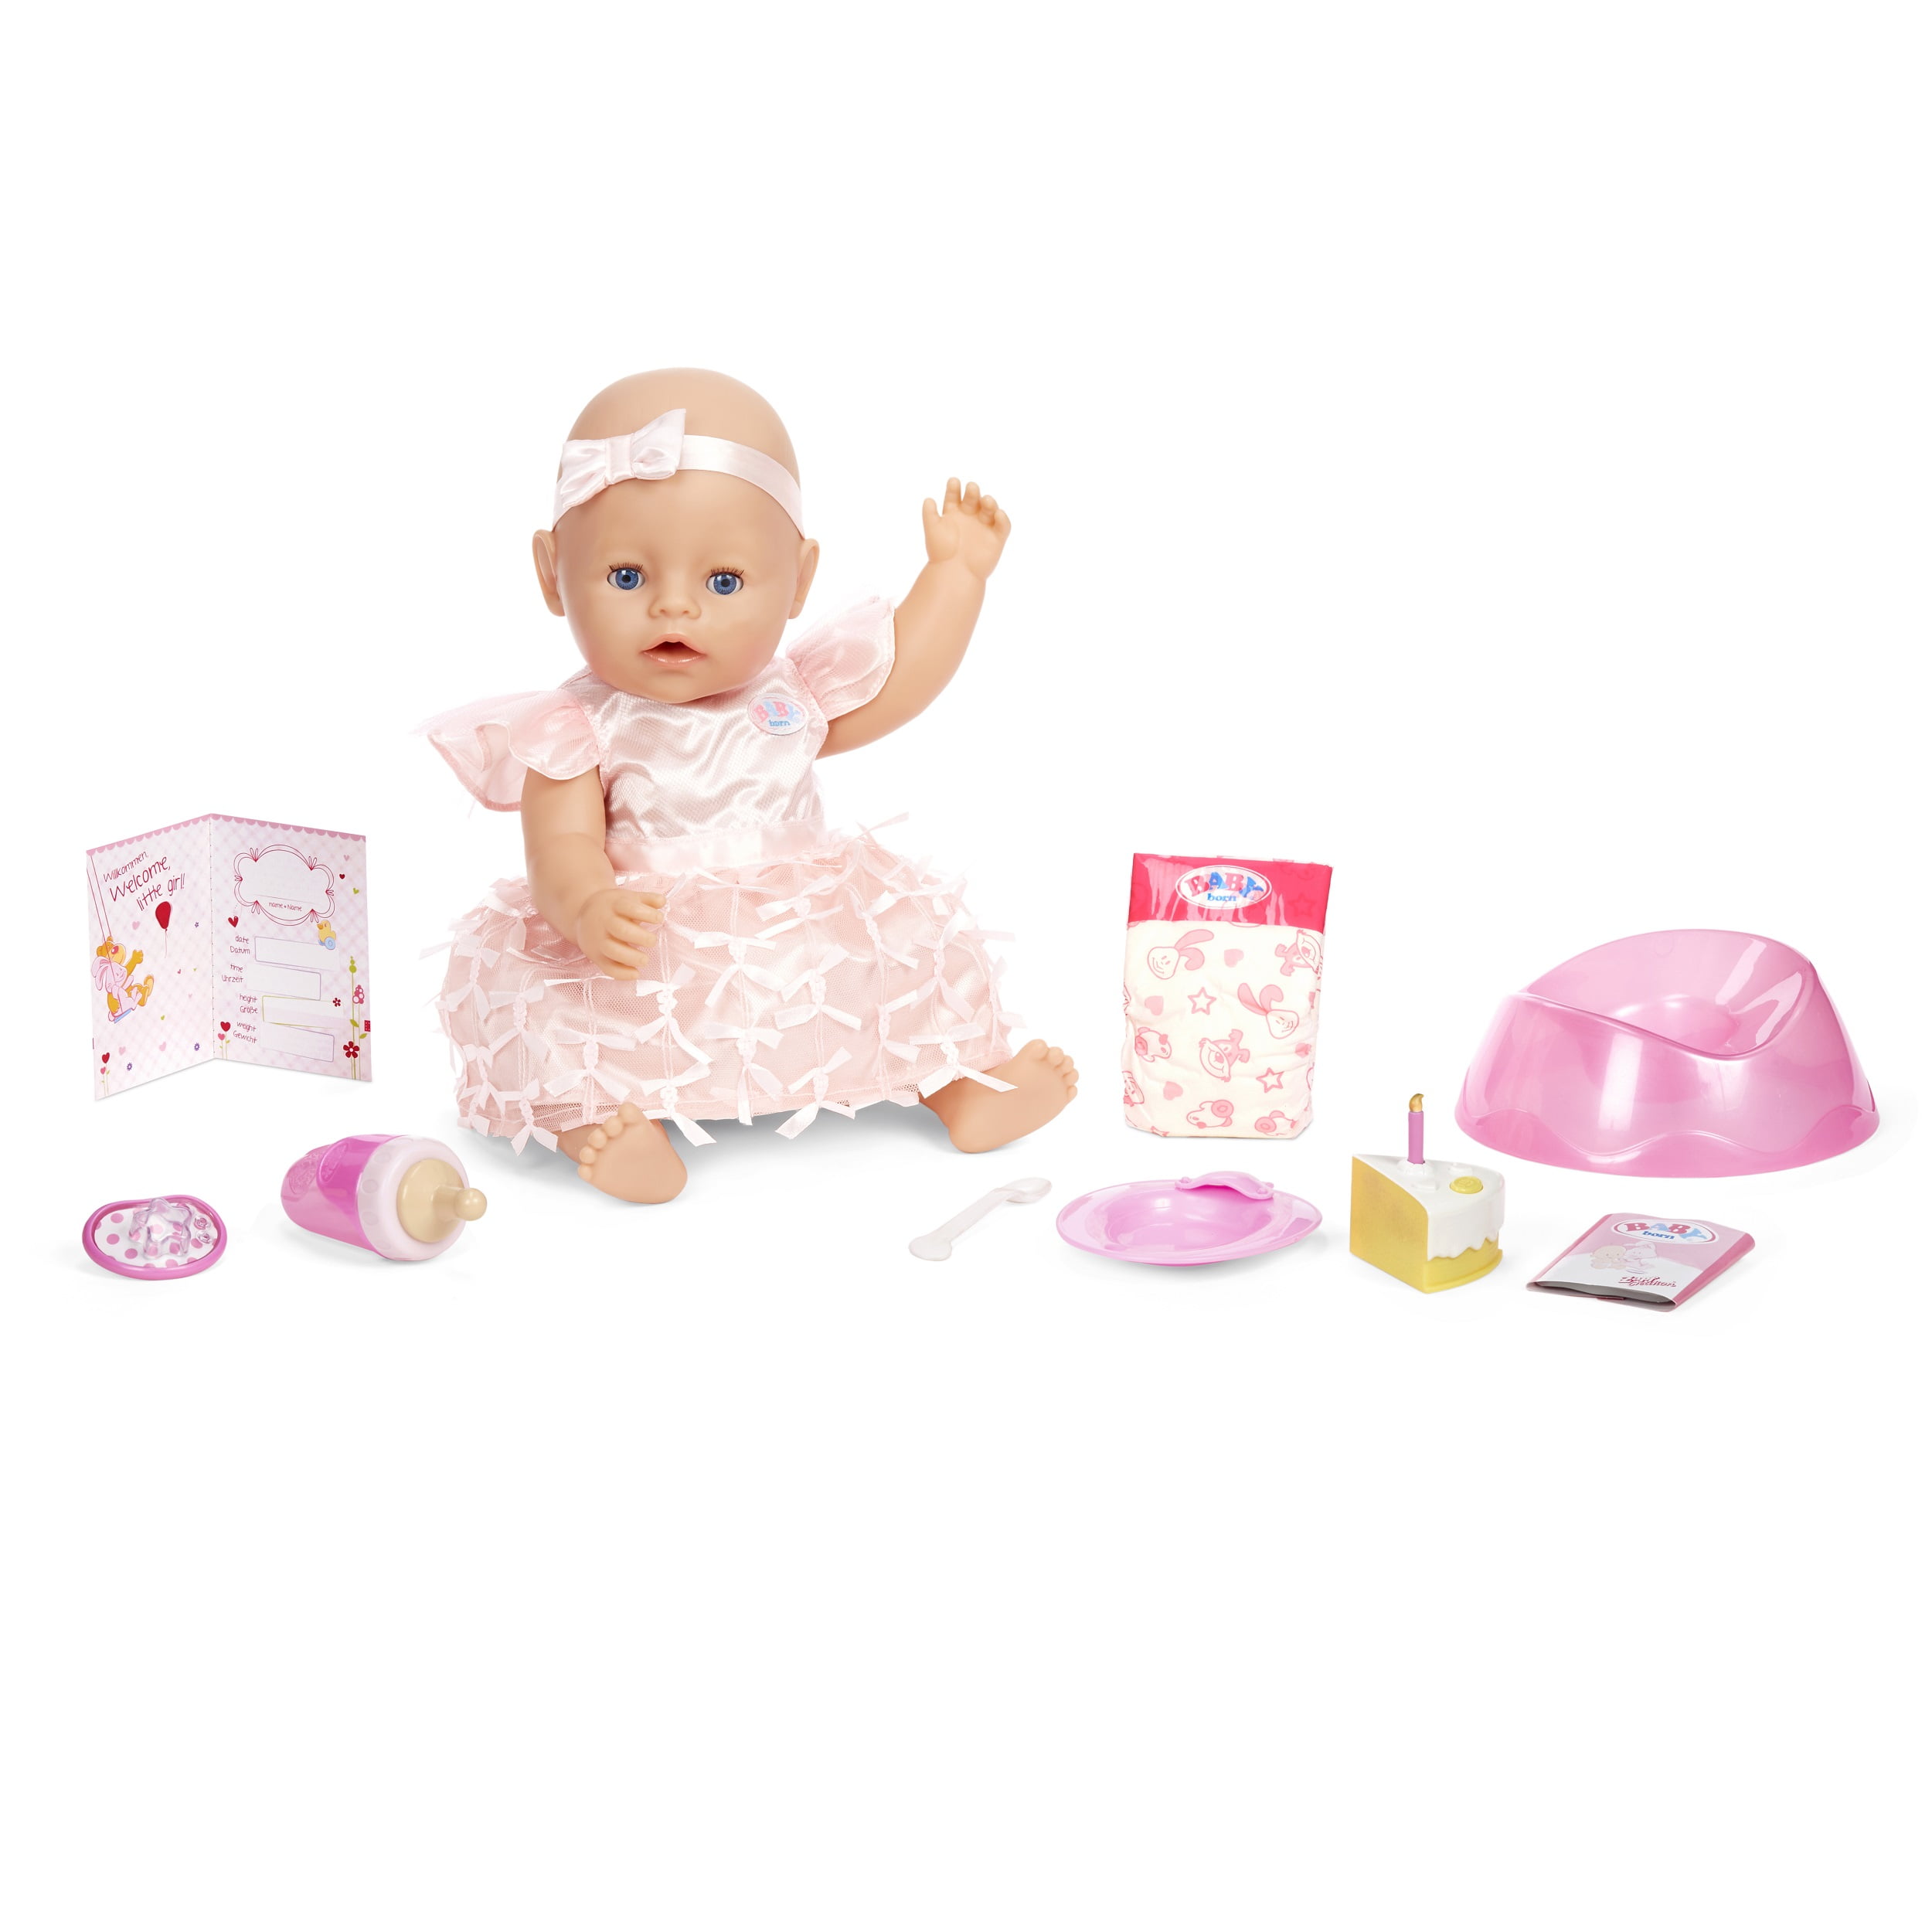 bar Ongewapend steenkool Baby Born Interactive Baby Doll Party Theme, Blue Eyes, 9 Ways to Nurture  (Eats, Drinks, Cries, Sleeps, Bathes, and Wets), Toys for Toddlers and  Preschool Girls and Boys 2 3 4+ - Walmart.com